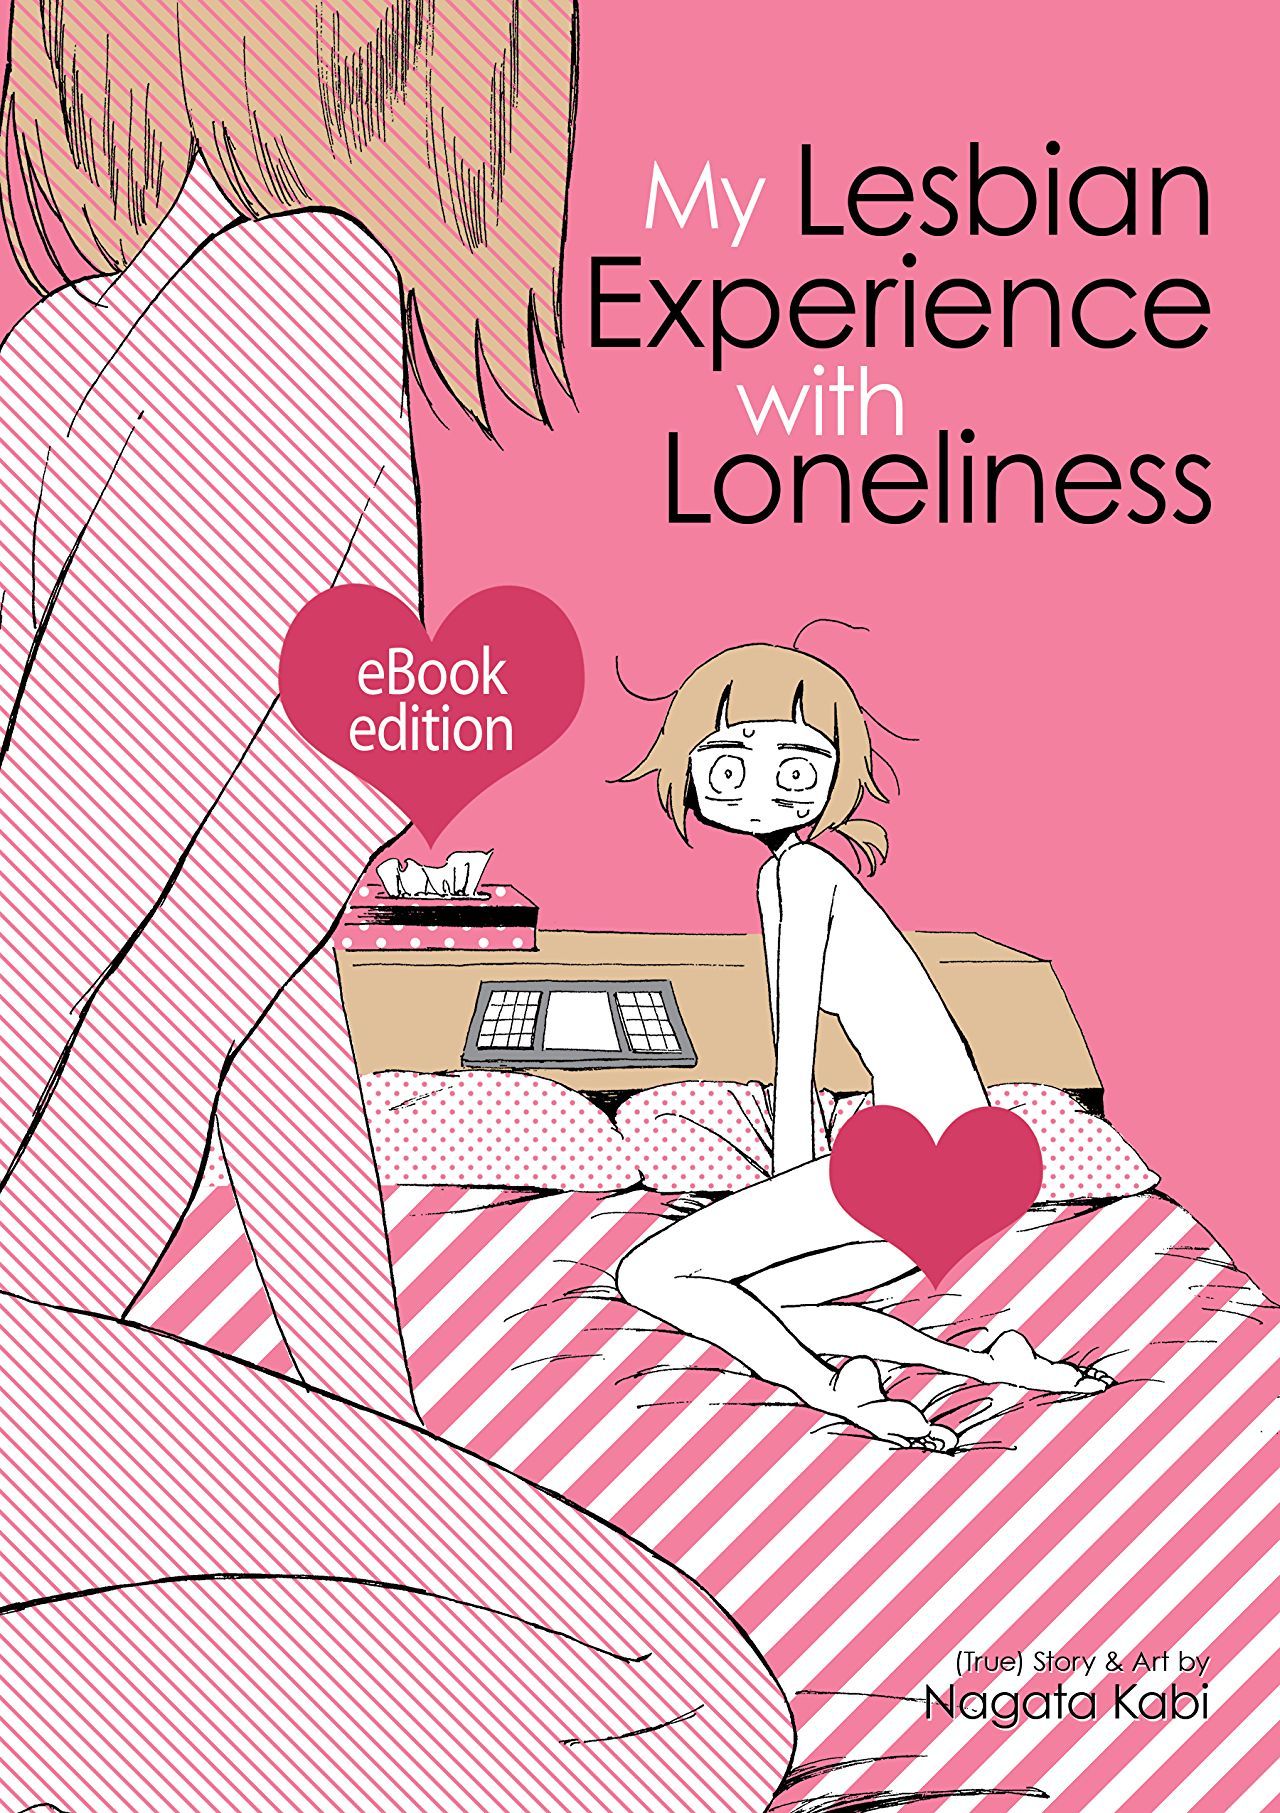 comixology: MY LESBIAN EXPERIENCE WITH LONELINESS  Kabi Nagata’s candid tell-all